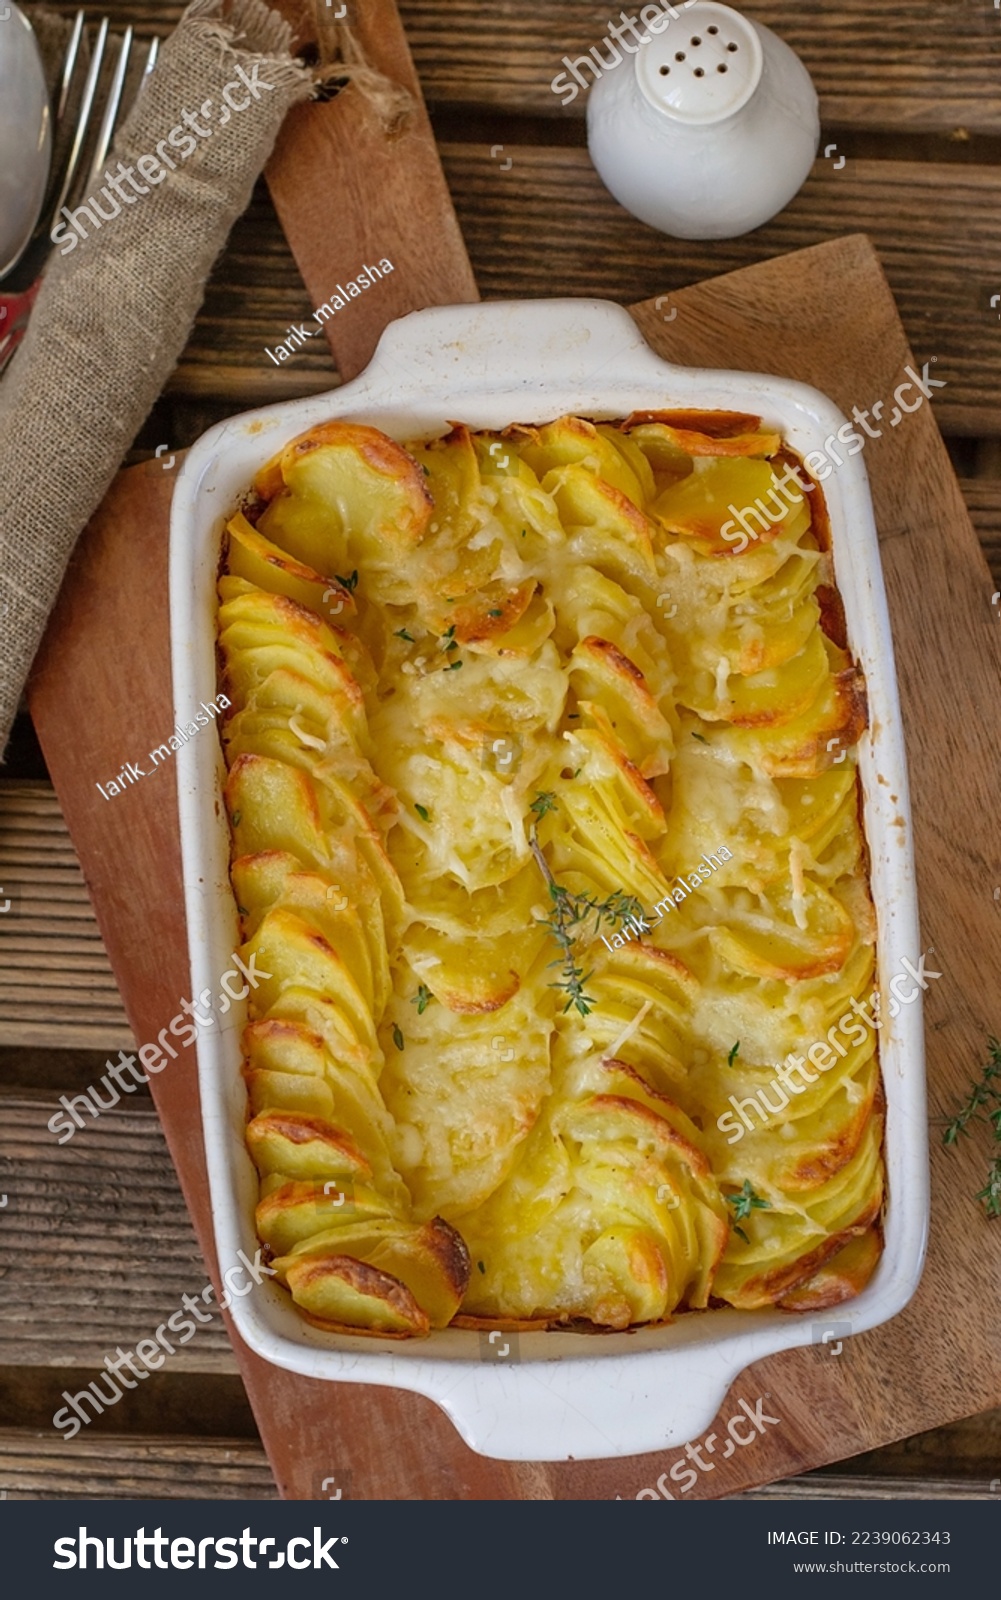 Sliced potatoes baked in cream and cheese Gratin dauphinois #2239062343